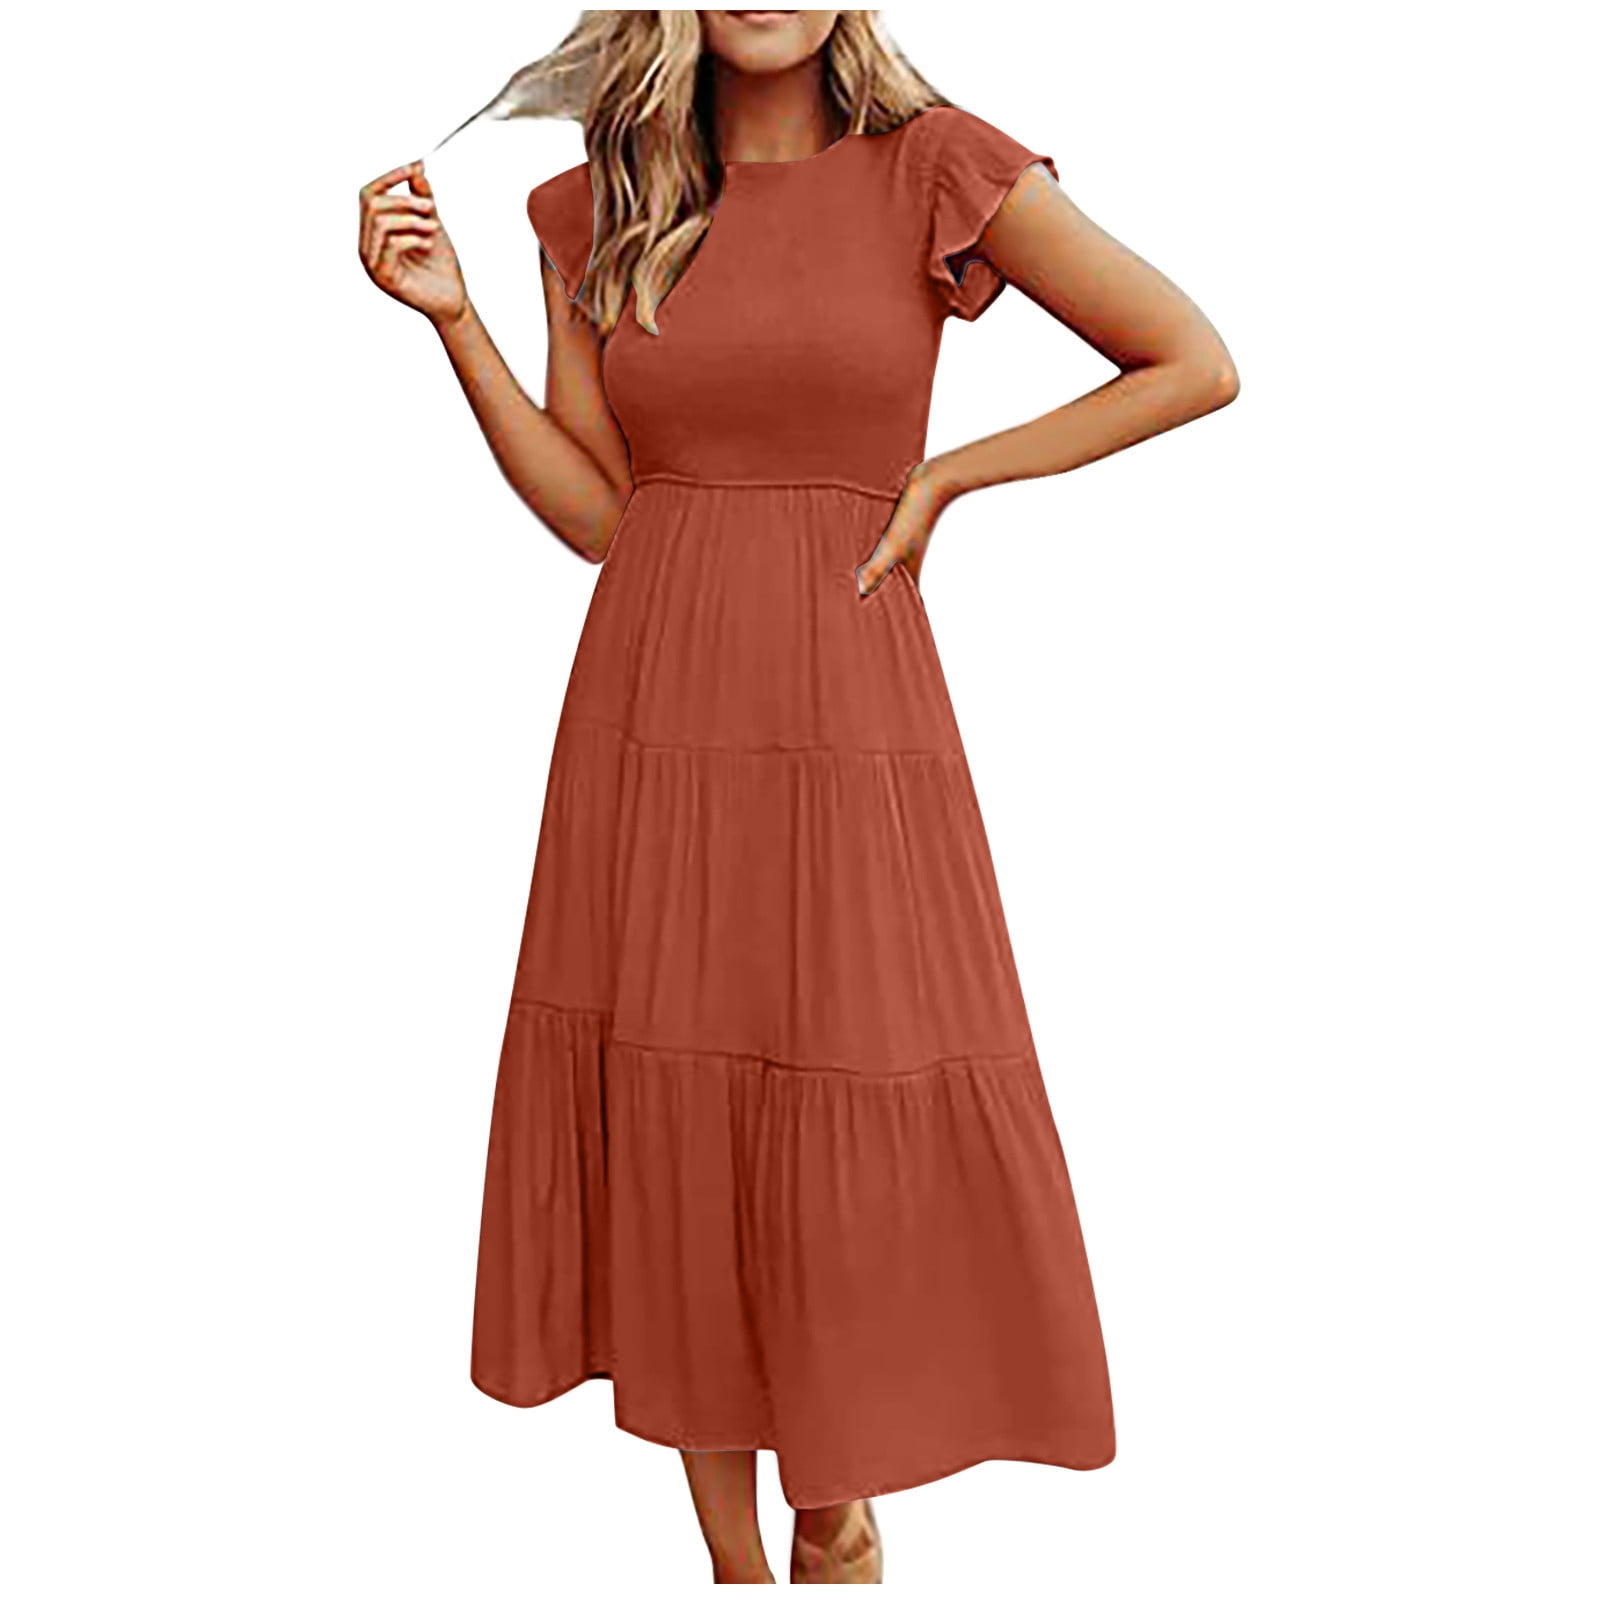 New Loose A-Line Casual Butterfly Sleeves Elegant Solid Color Midi Dress | Casual  dresses for women, Butterfly sleeves, Women's fashion dresses